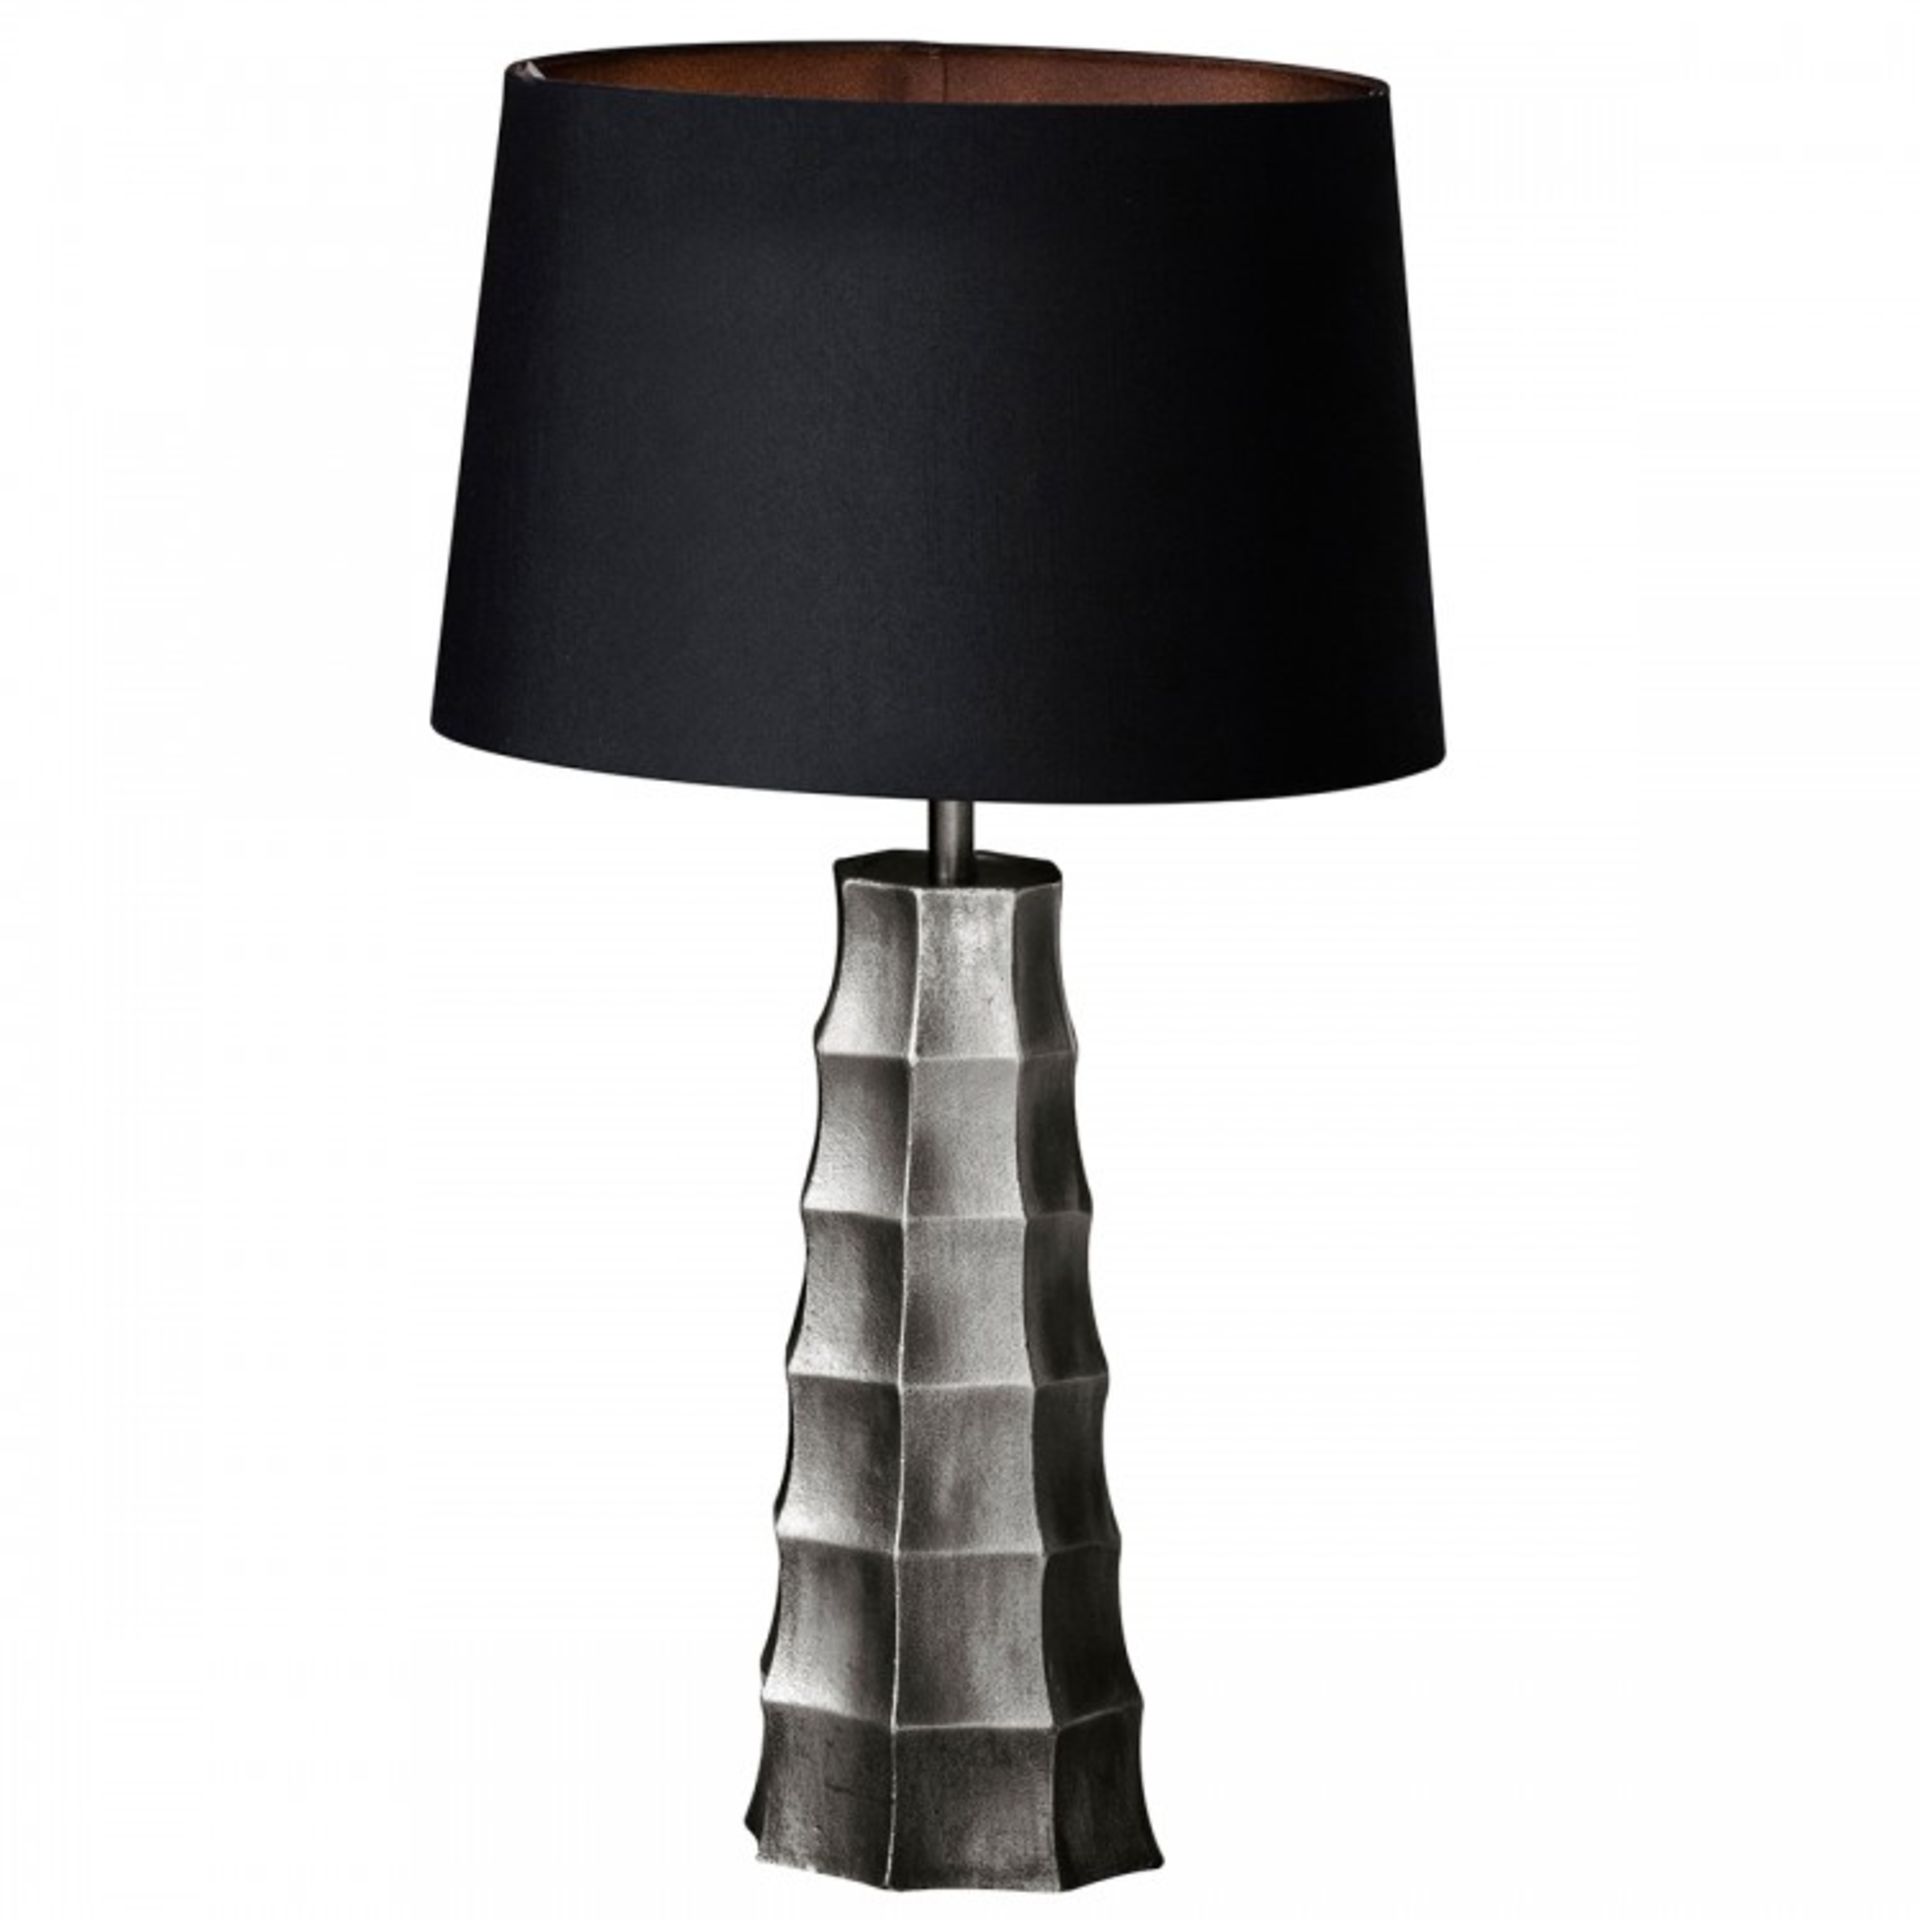 Hadlock Table Lamp Base Ant Nickel Base Only A modern and contemporary lamp stunning design - Image 2 of 2